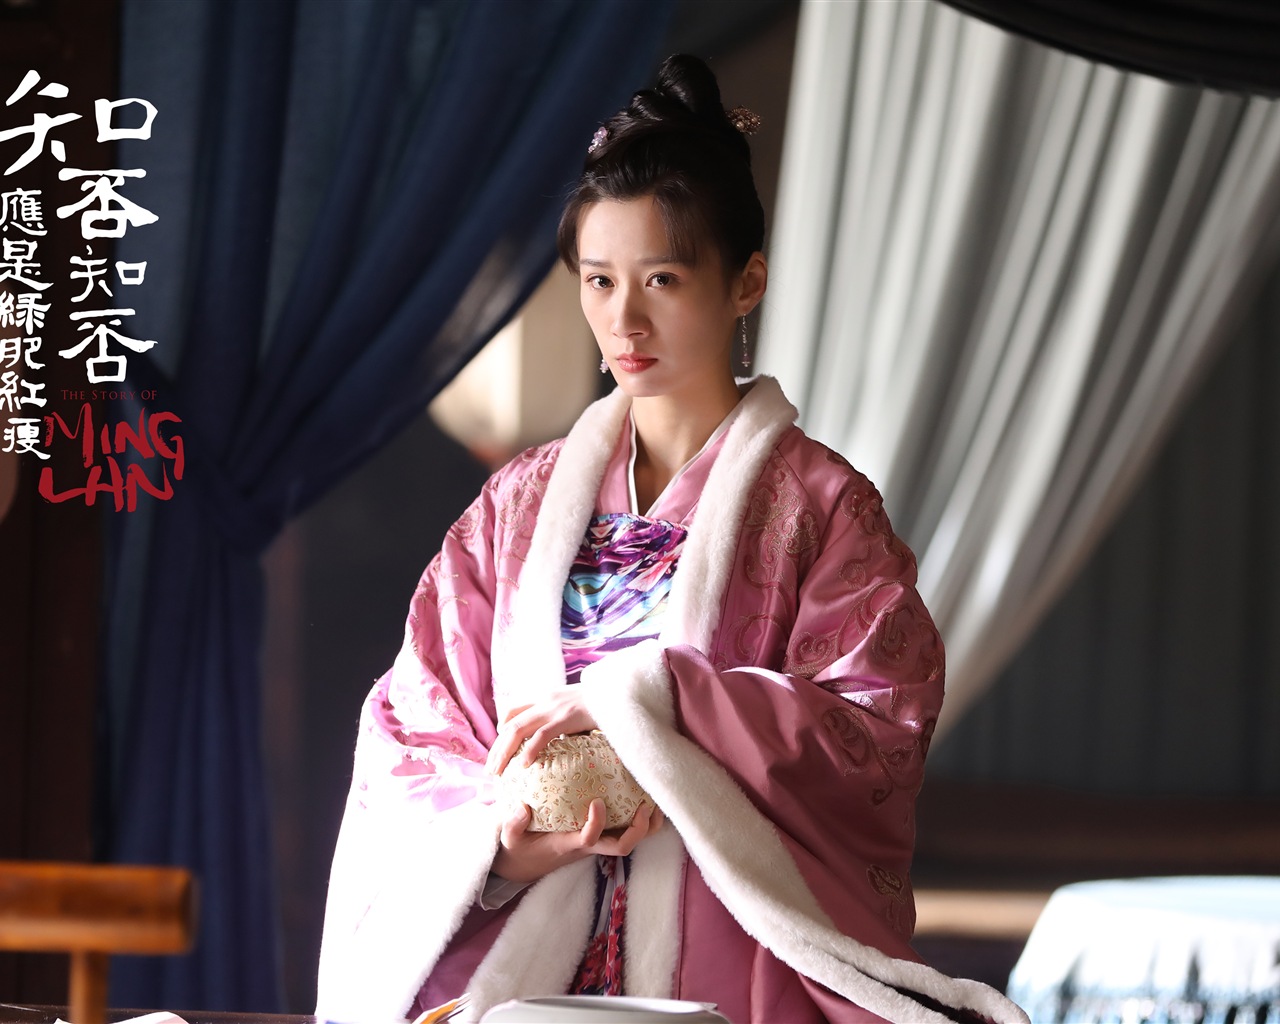 The Story Of MingLan, TV series HD wallpapers #18 - 1280x1024